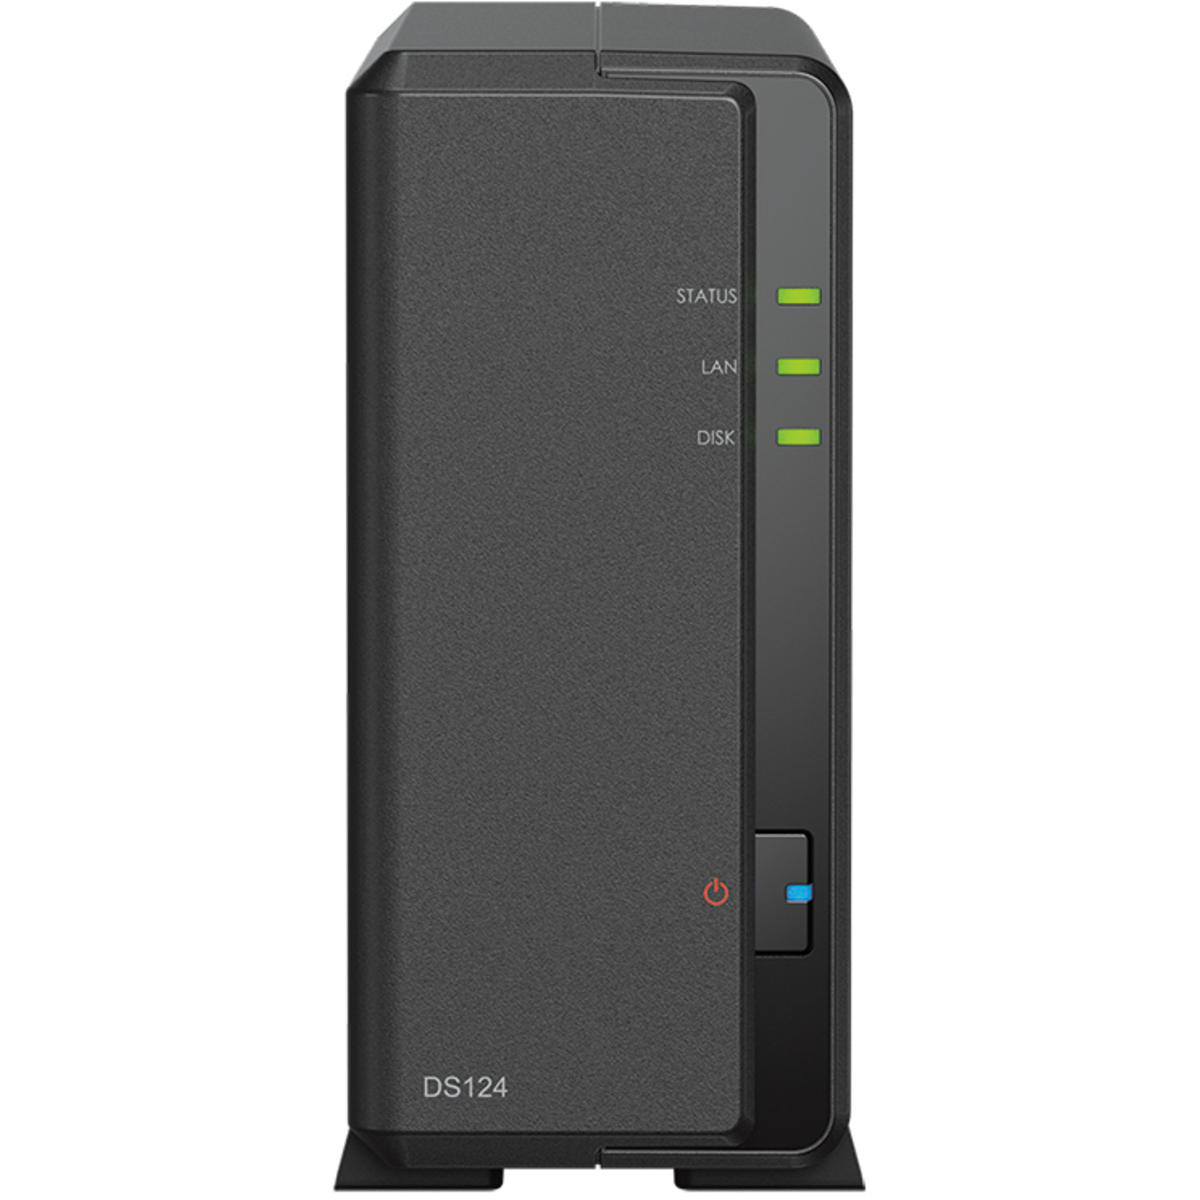 buy $385 Synology DiskStation DS124 2tb Desktop NAS - Network Attached Storage Device 1x2000gb Seagate IronWolf Pro ST2000NT001 3.5 7200rpm SATA 6Gb/s HDD NAS Class Drives Installed - Burn-In Tested - nas headquarters buy network attached storage server device das new raid-5 free shipping simply usa DiskStation DS124